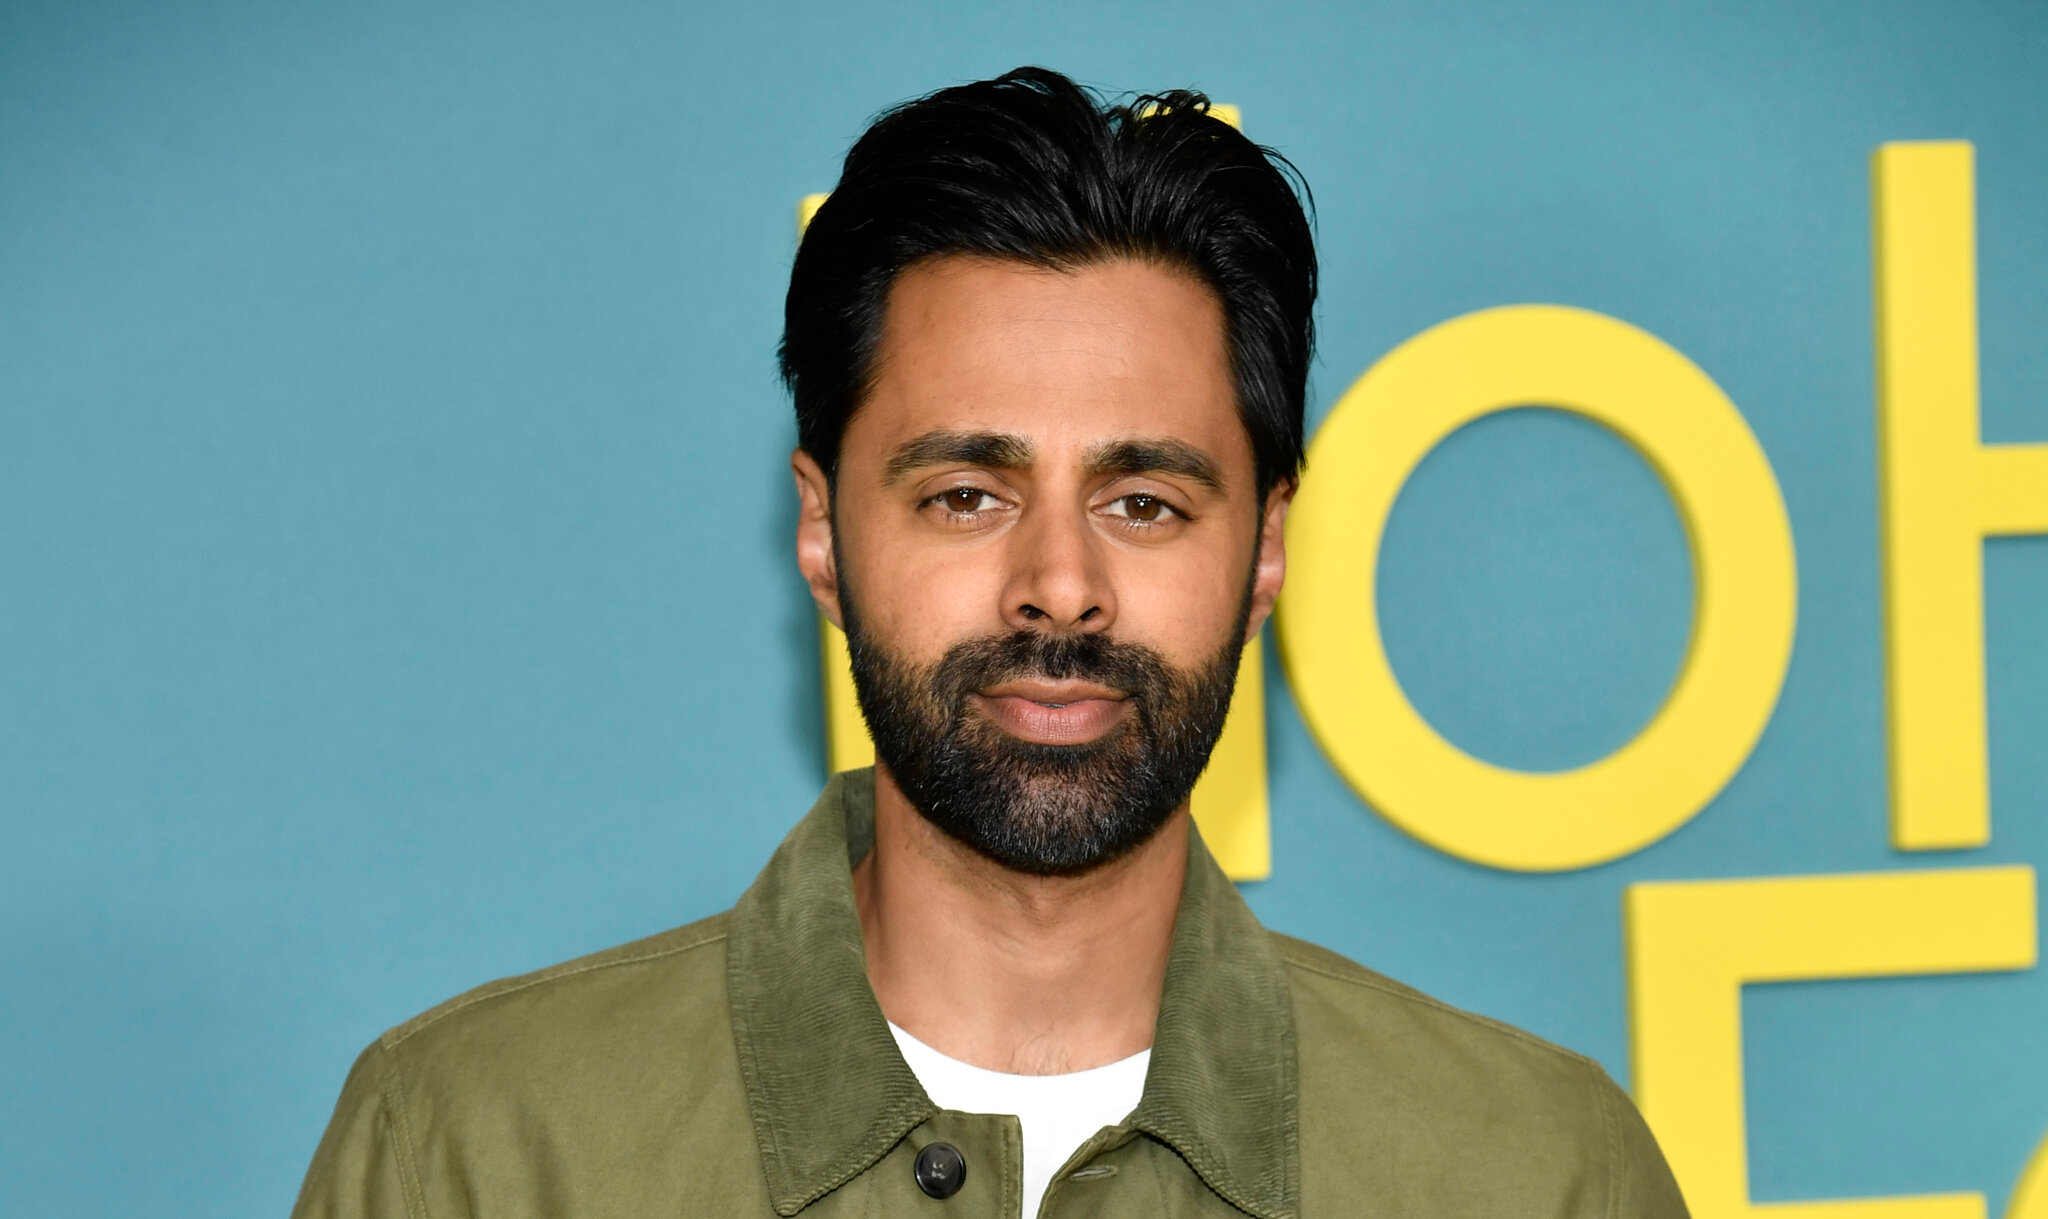 Hasan Minhaj Loses ‘Daily Show’ Gig Over Embellishing Stories, Reports Say